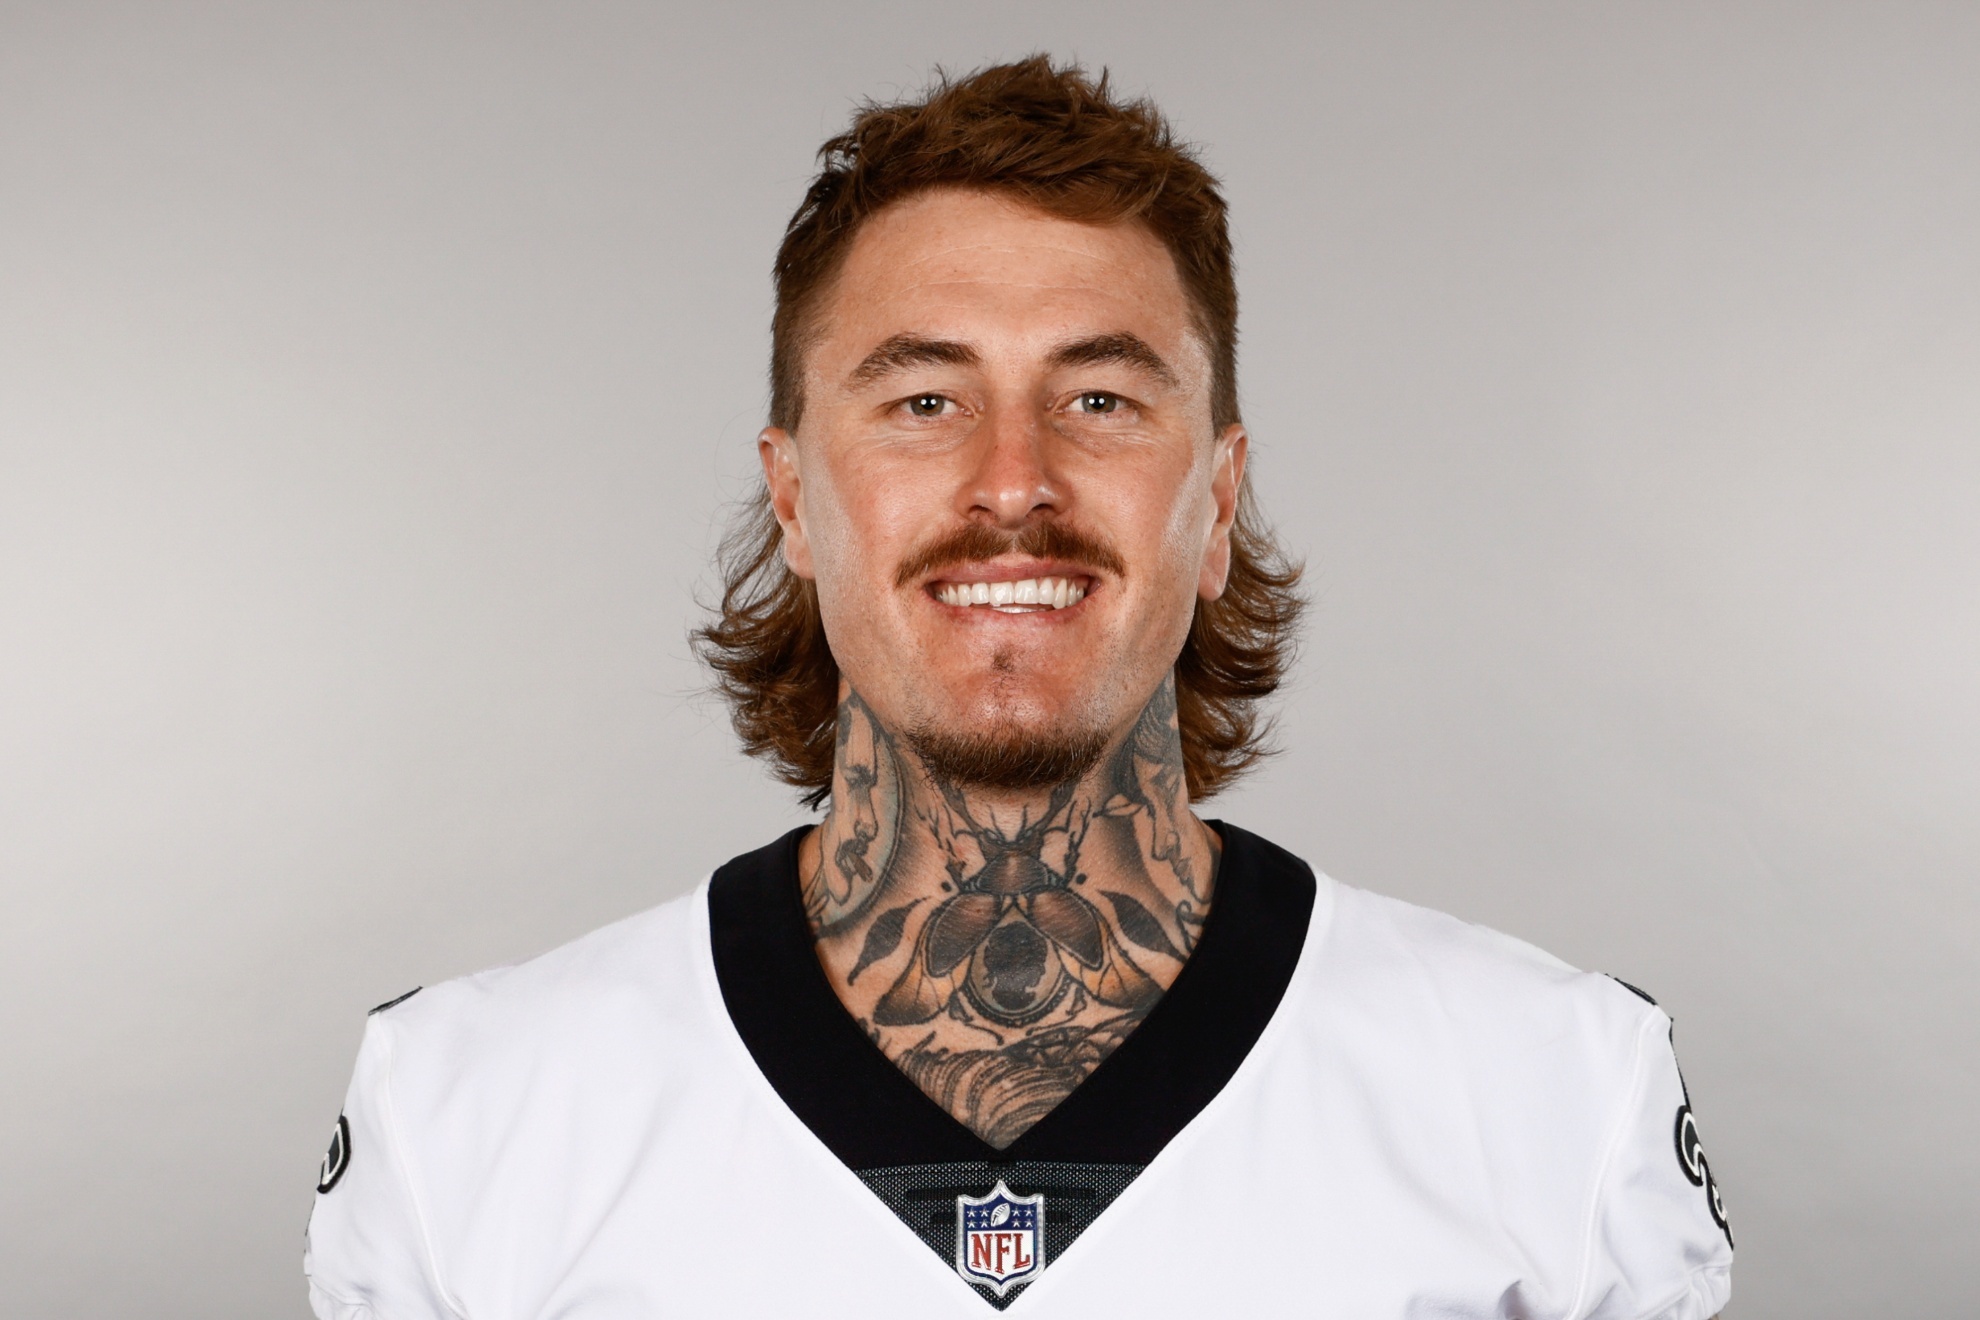 Australian punter Lou Henley's journey to the NFL included a tattoo parlor in Bali